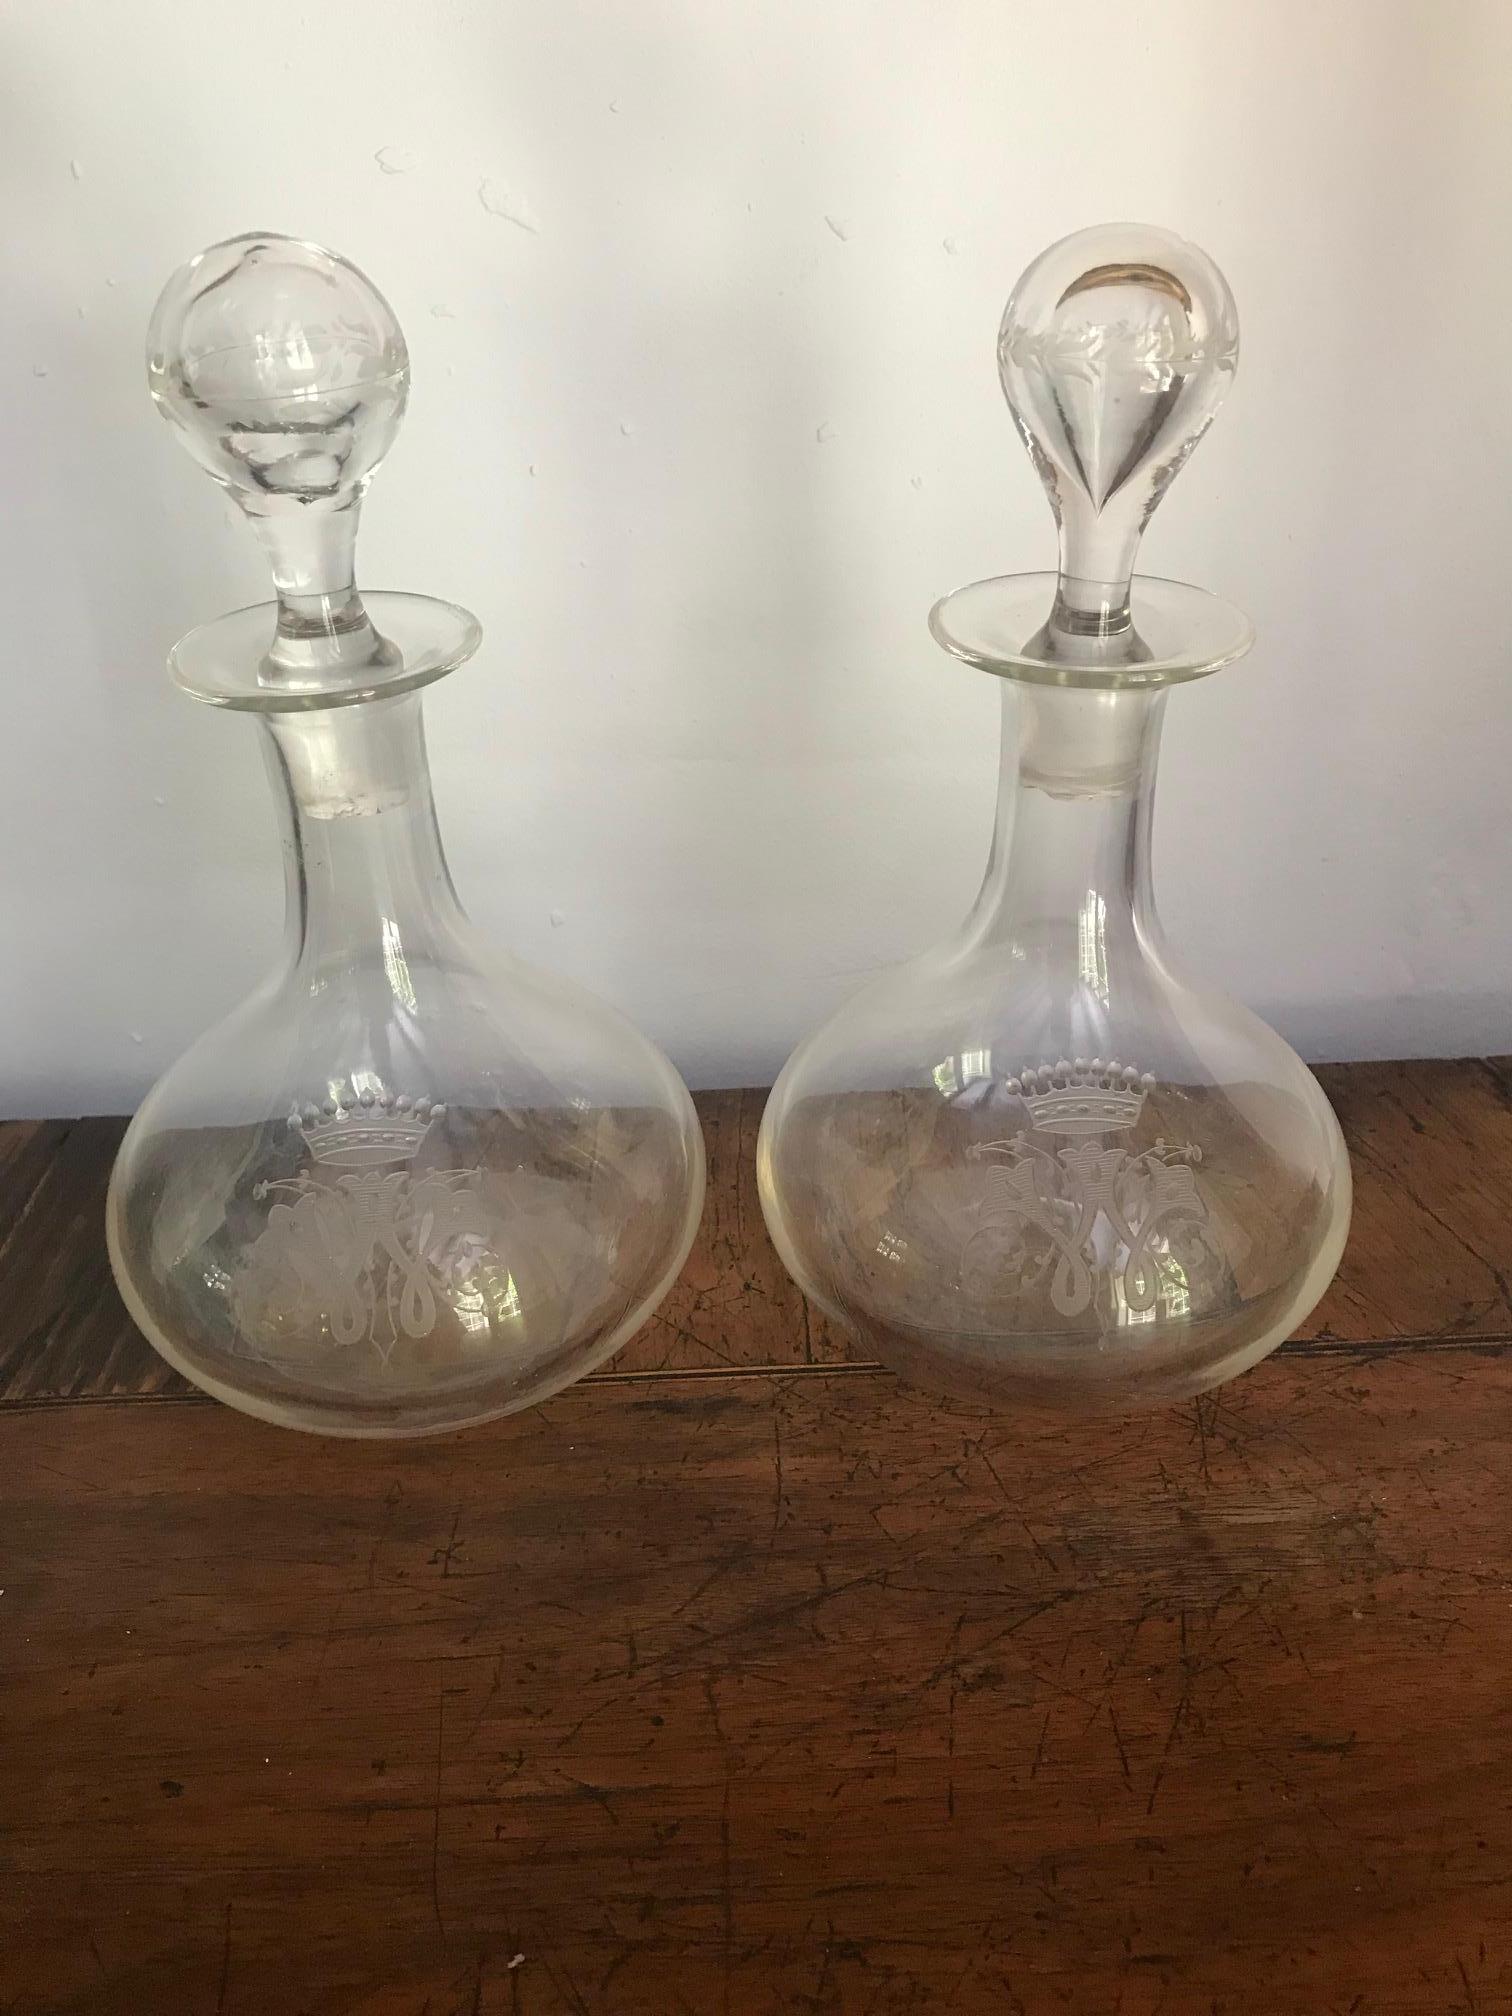 An exquisite pair of 19th century French crystal decanters engraved with monogram and coronet. Unsigned but of Baccarat quality.